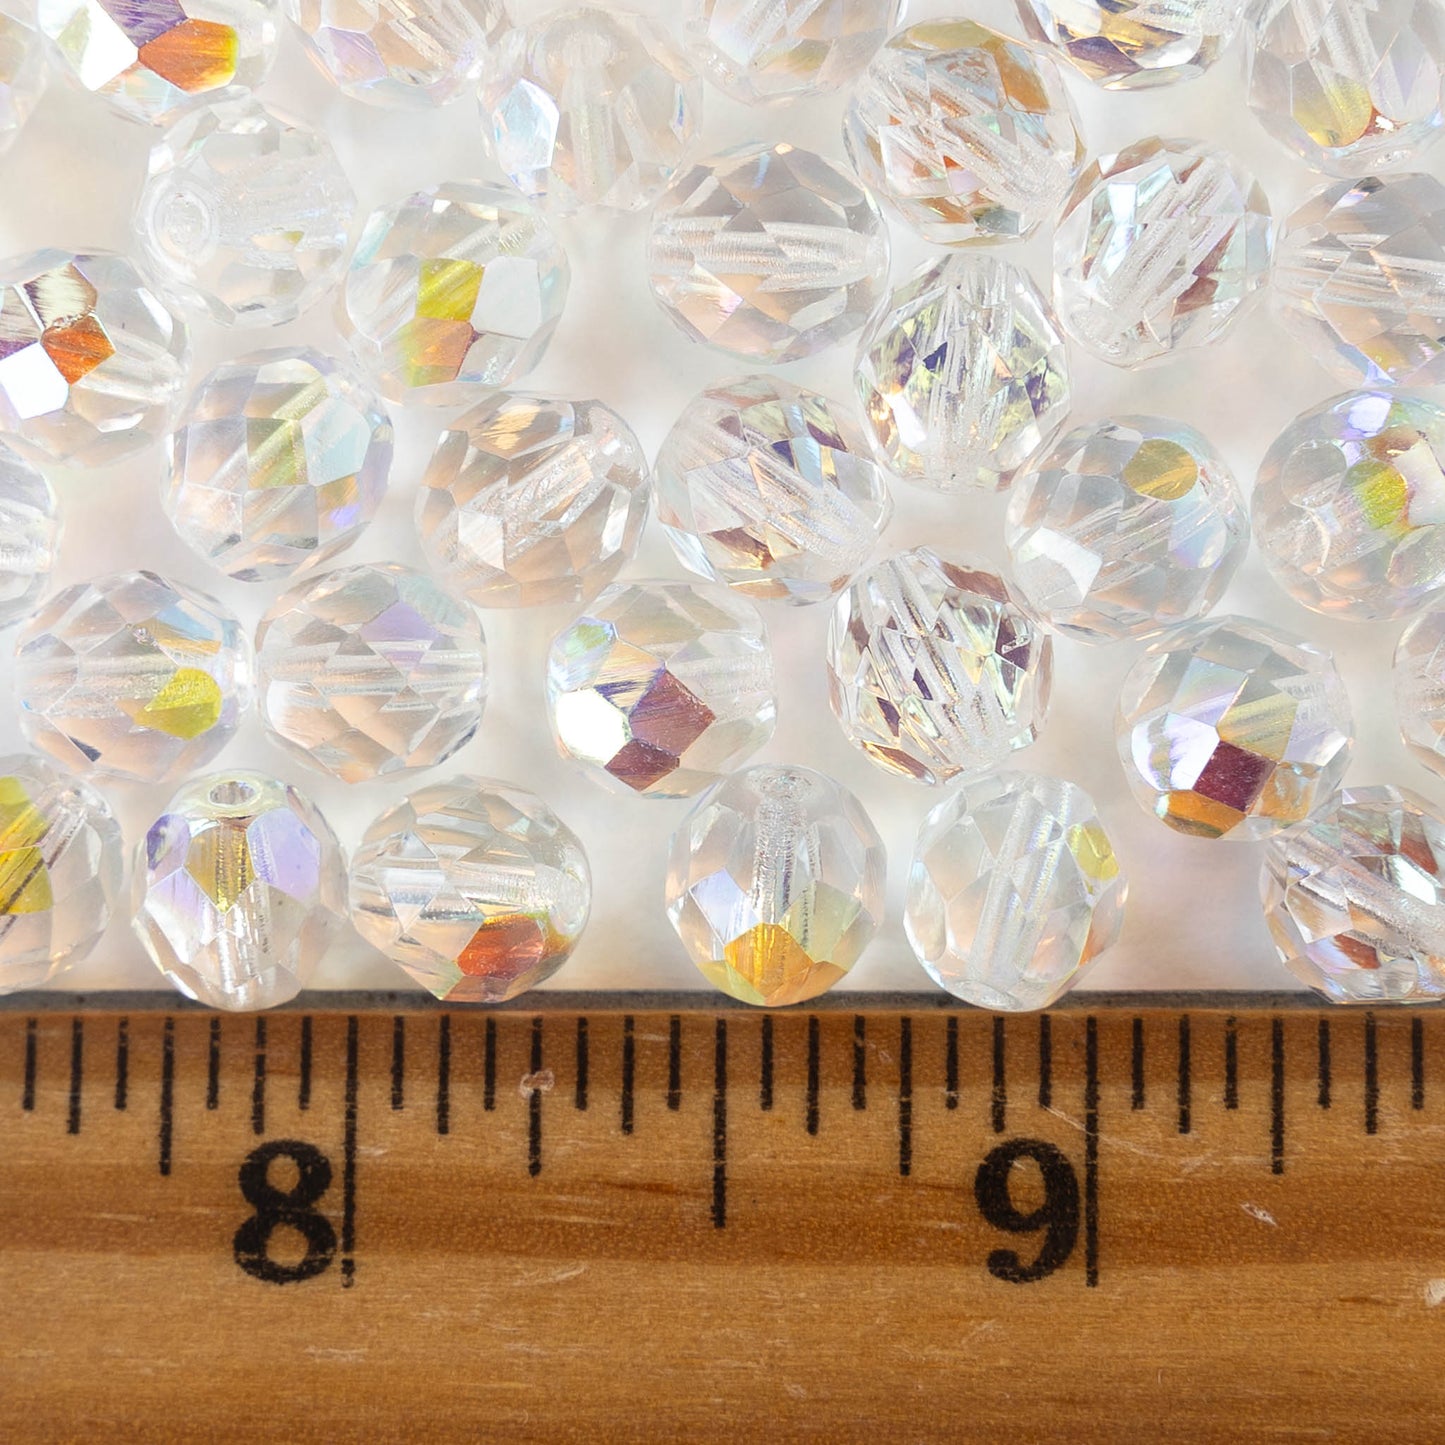 8mm Round Beads - Crystal AB - 30 Beads